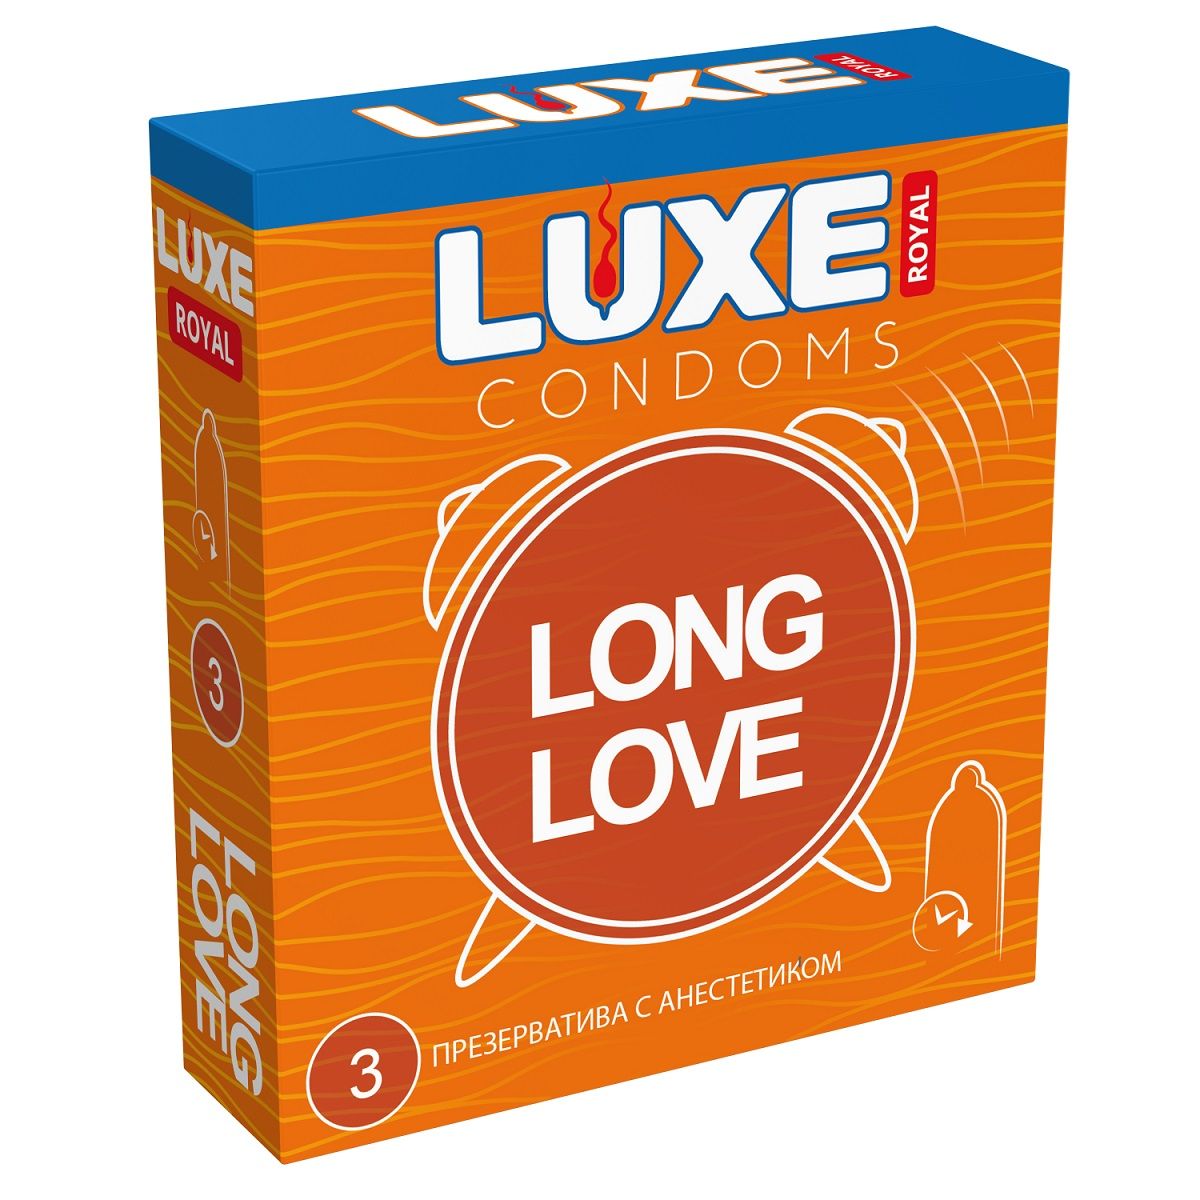     LUXE Royal Long Love - 3 .